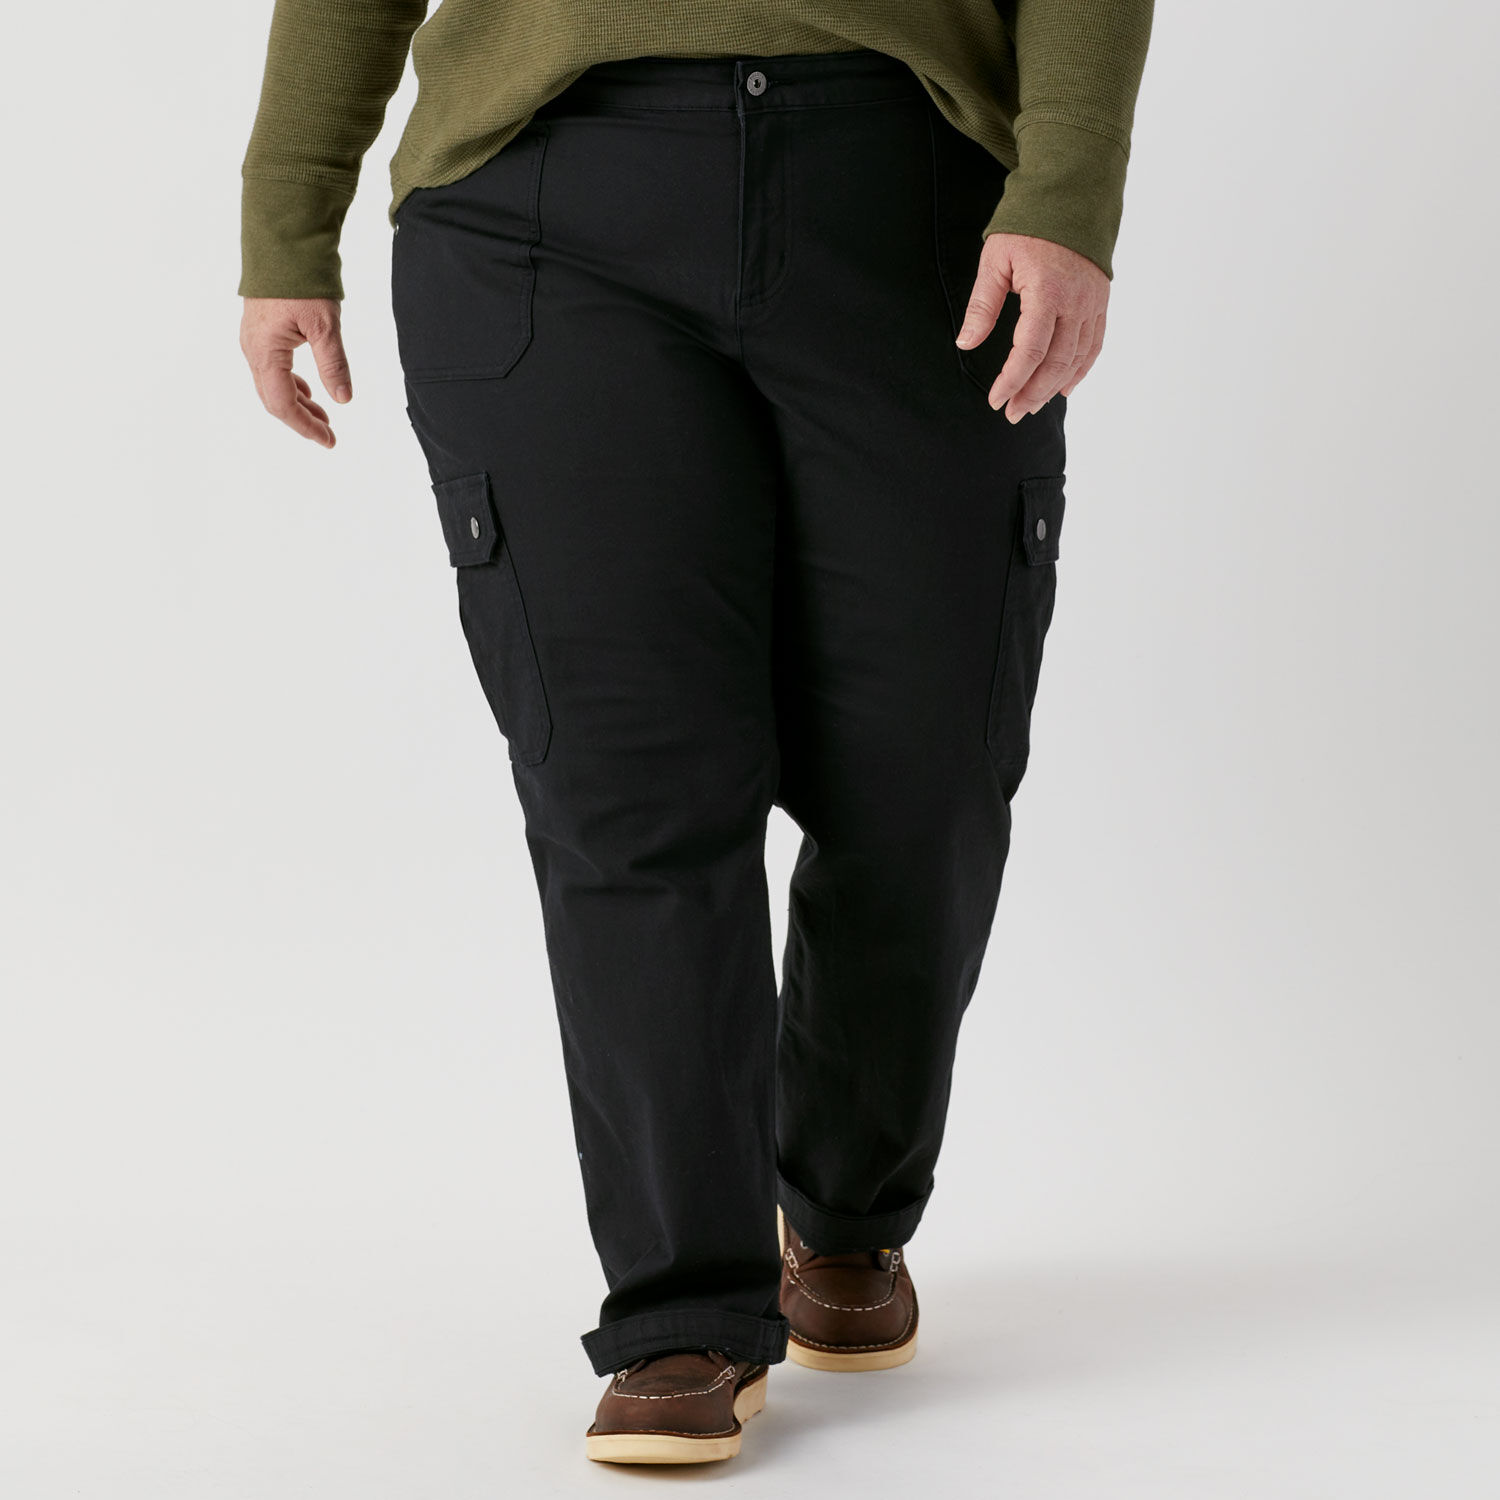 Plus Size Cargo Pants to Buy! | Gallery posted by DAËON | Lemon8